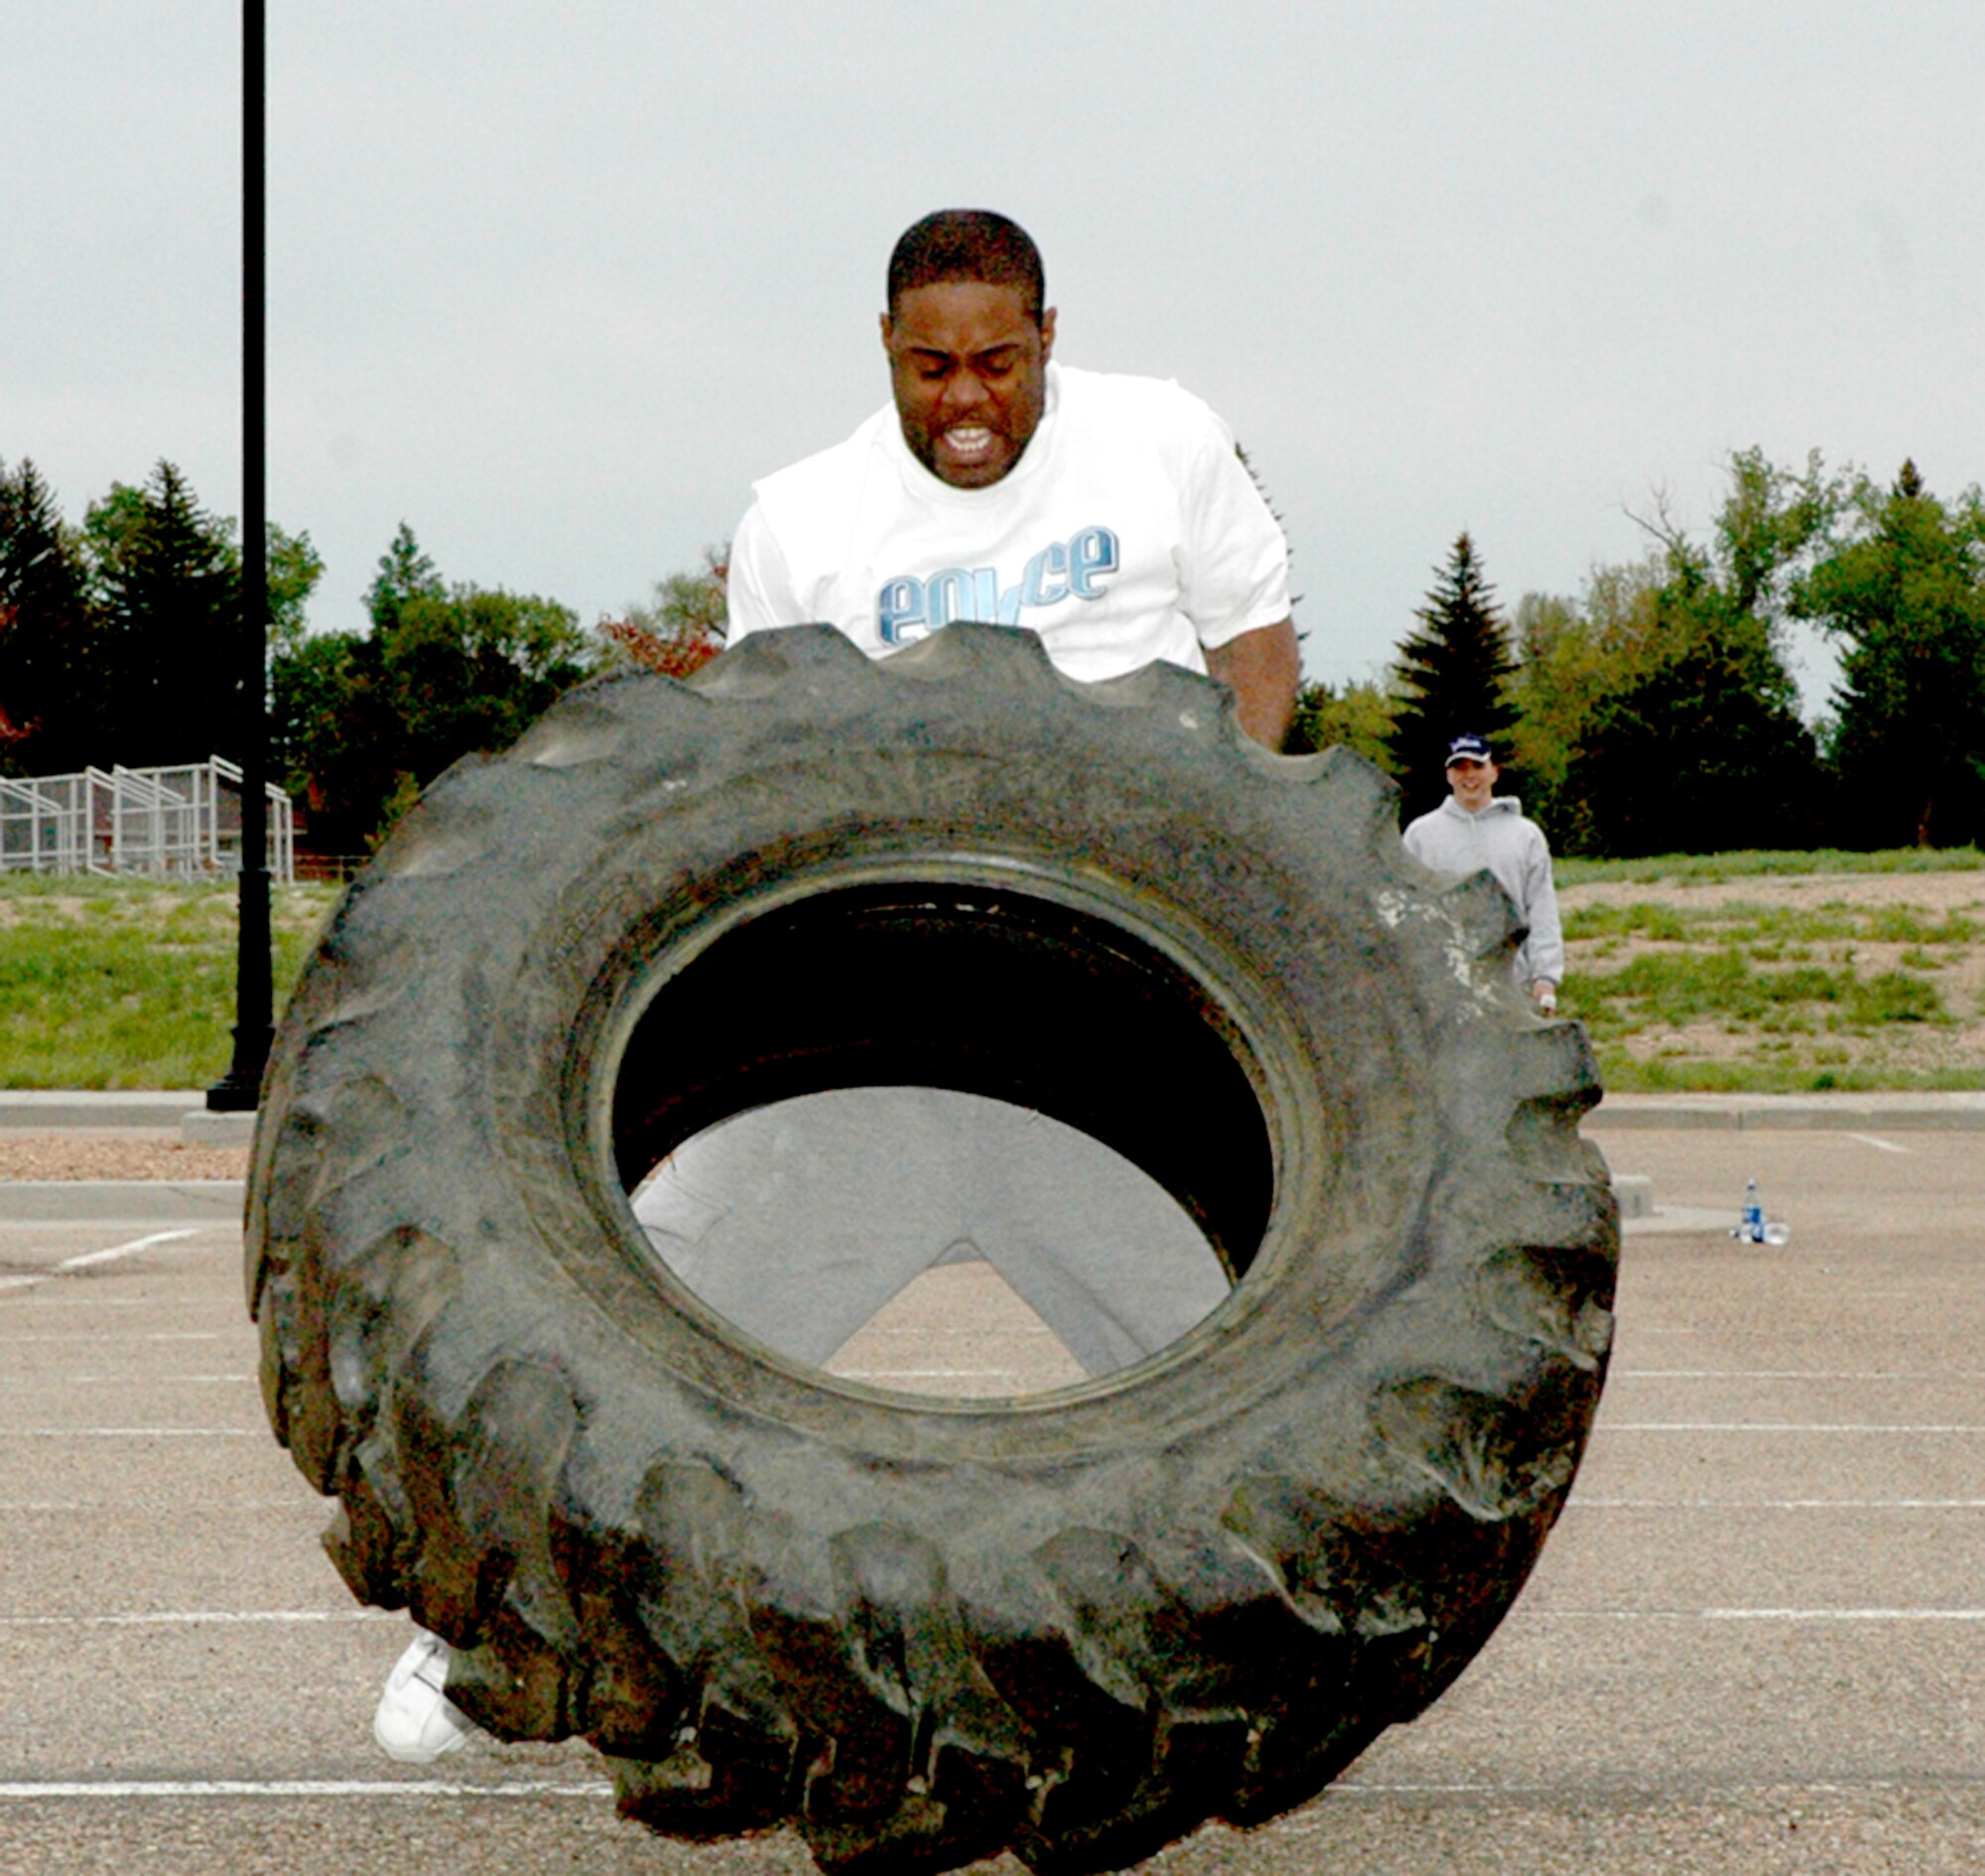 Staff Sgt. Ricardo Hollingsworth, 90th Missile Maintenance Squadron, flips a tire toward the finish line during the strongman competition at the base gym May 23. The tire flip was one of five challenges in this competition. The competition was the last event of May Fitness Month (Photo by Airman 1st Class Daryl Knee).